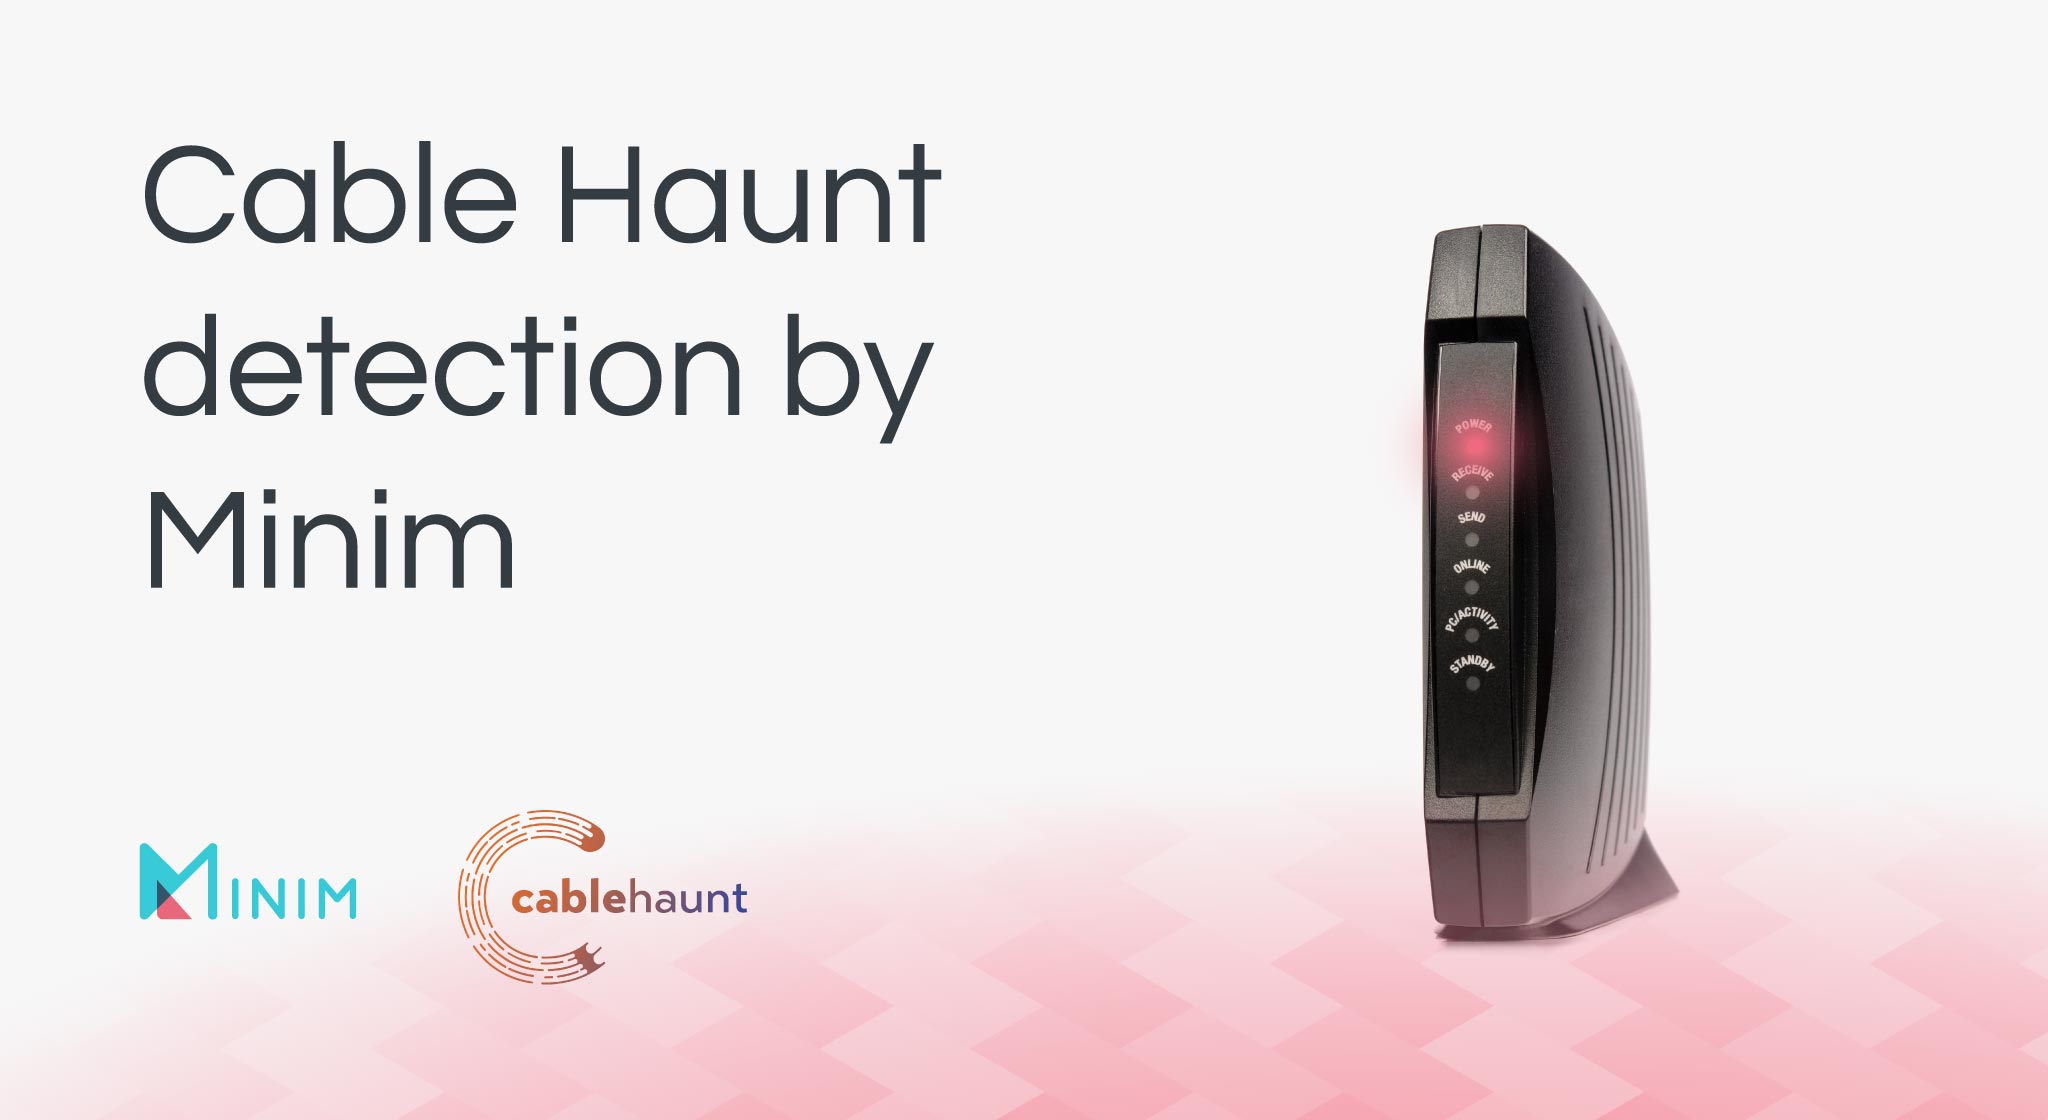 What is Cable Haunt?